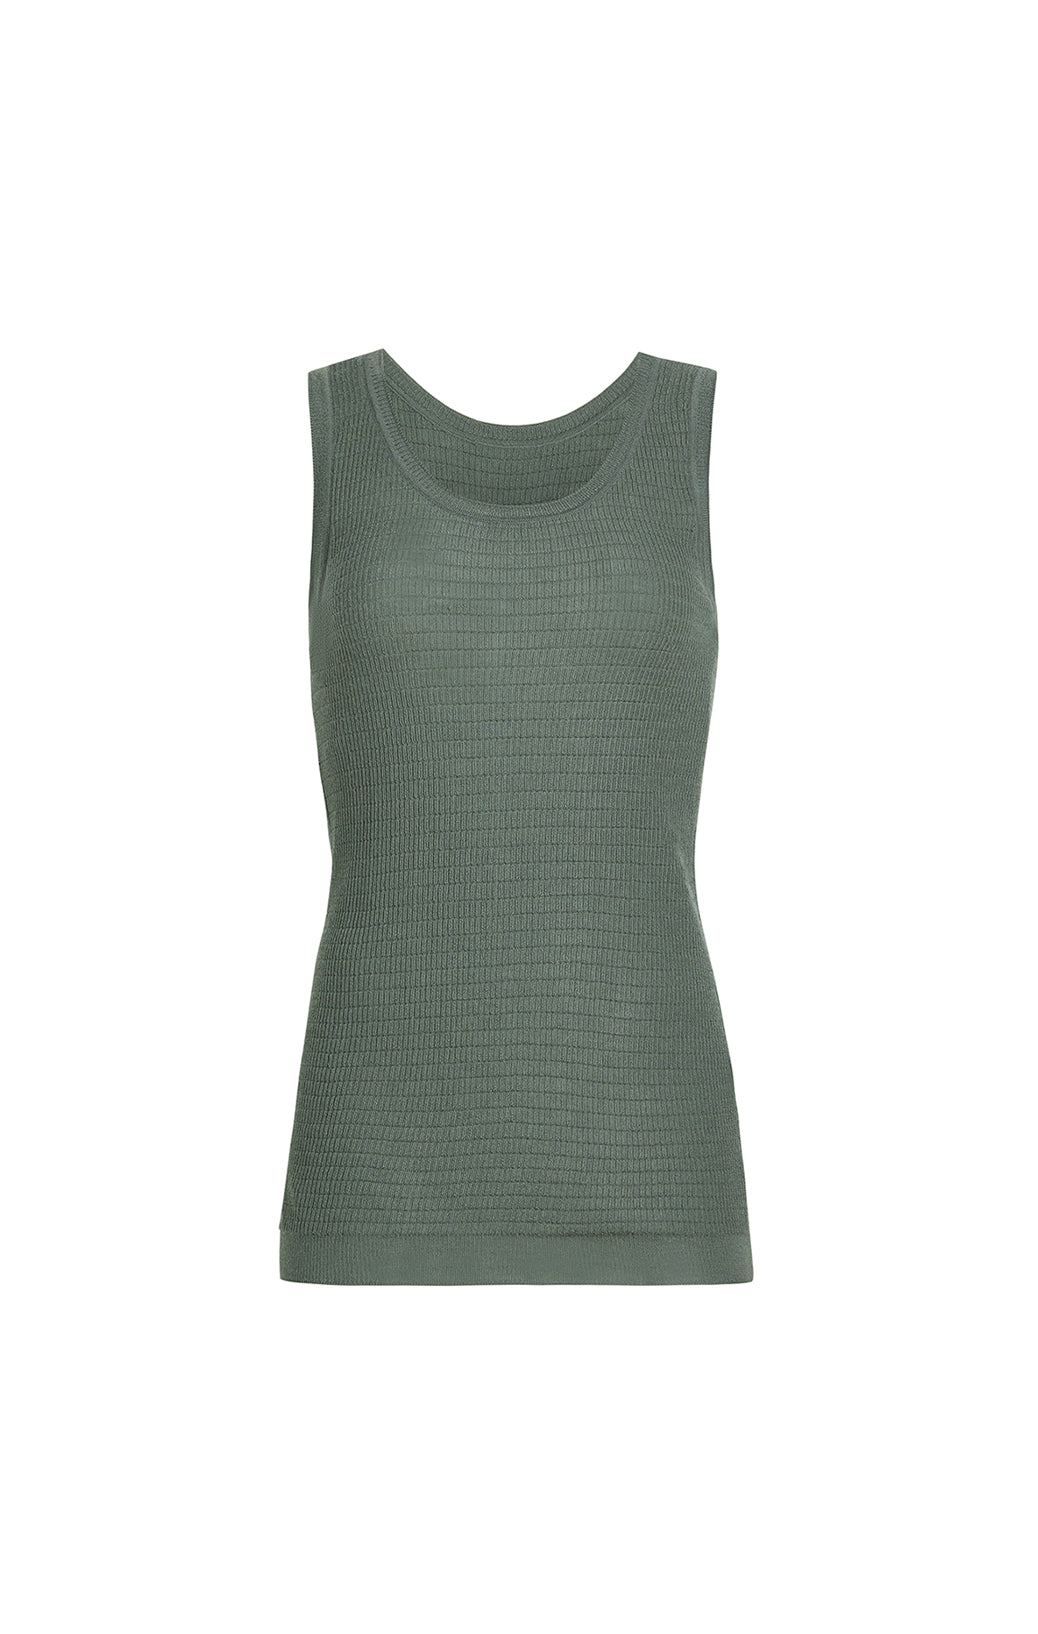 Multiverse - Reversible Scoop-Neck Tank -  Product Image